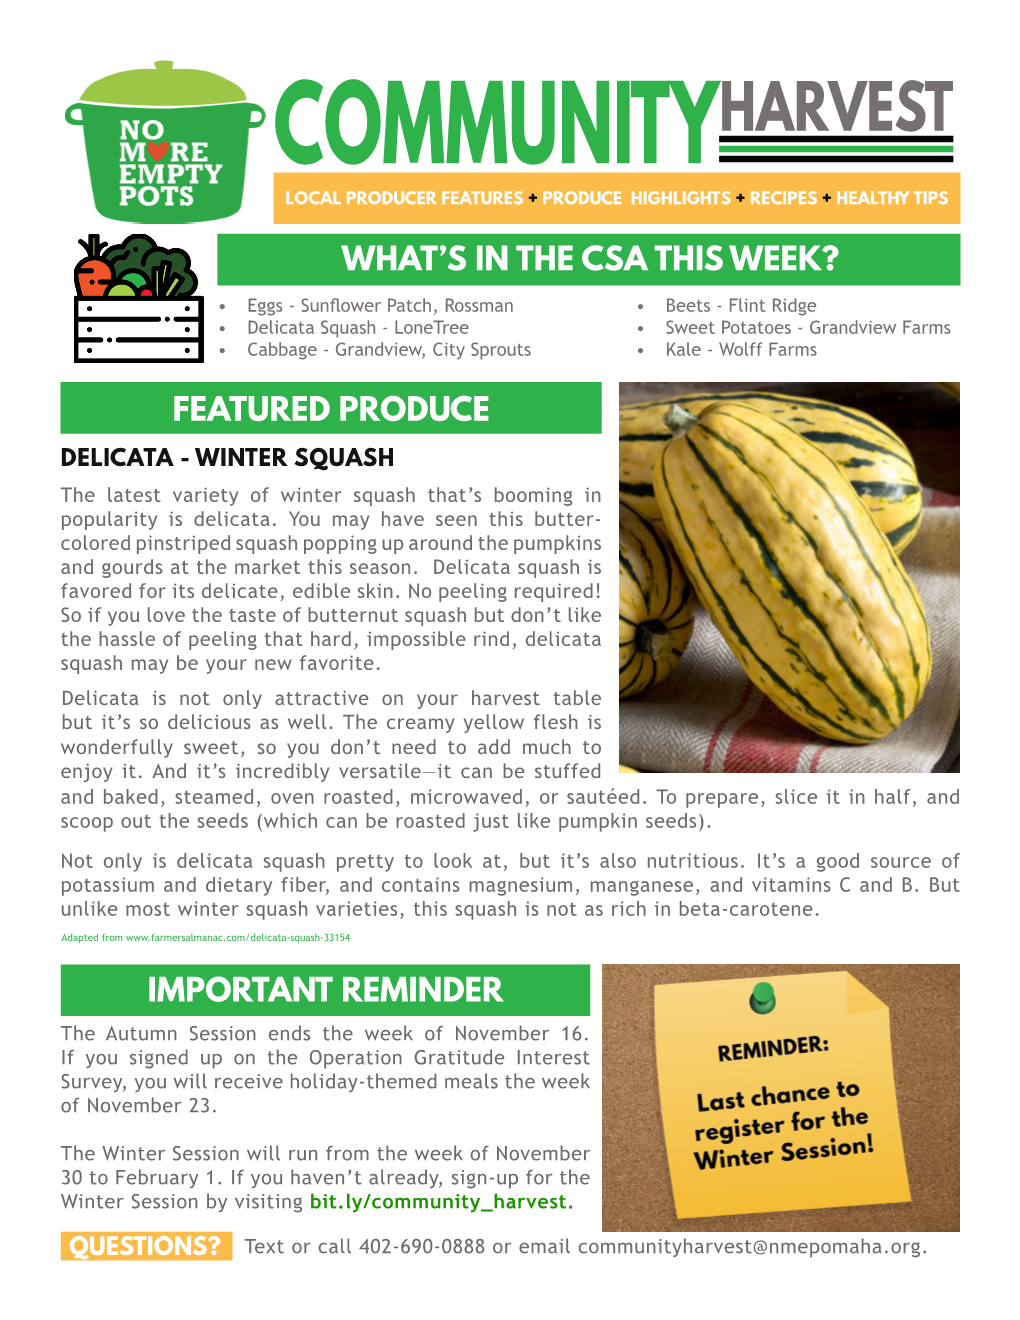 Communityharvest Local Producer Features + Produce Highlights + Recipes + Healthy Tips